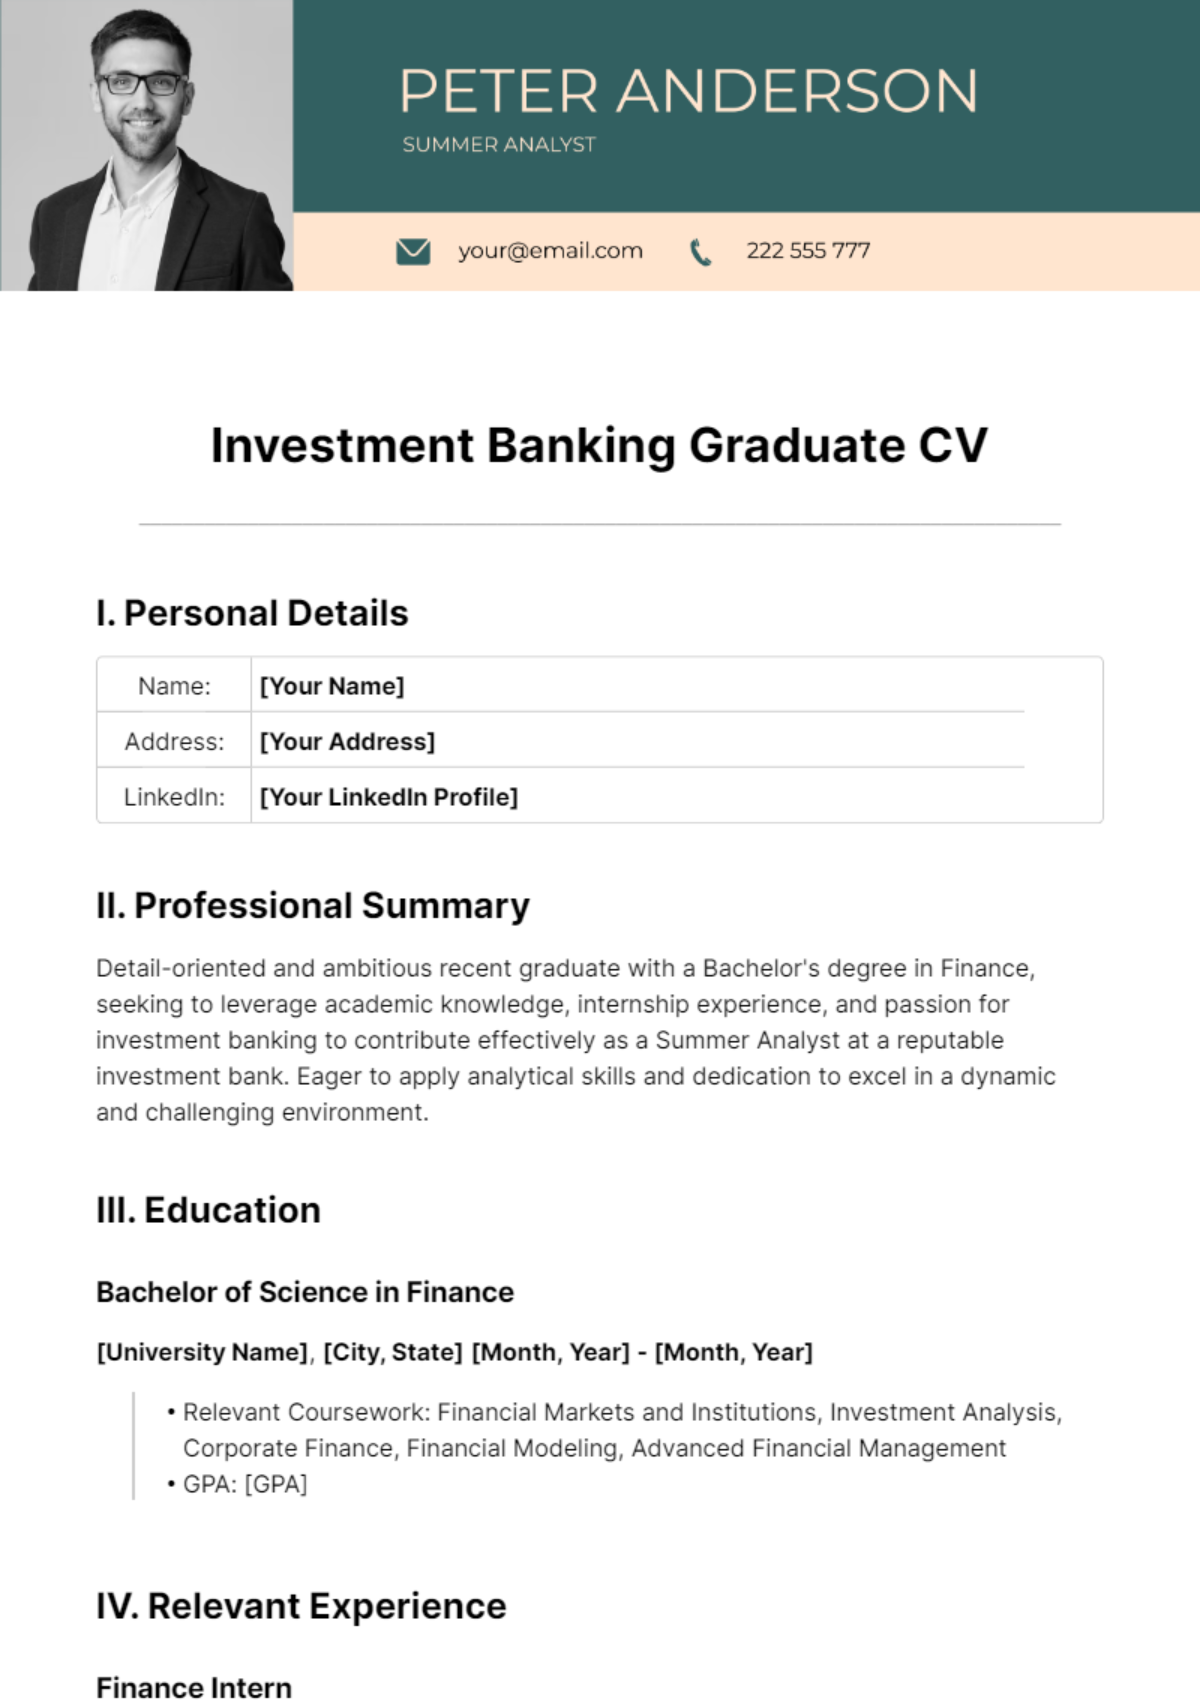 Investment Banking Graduate CV Template